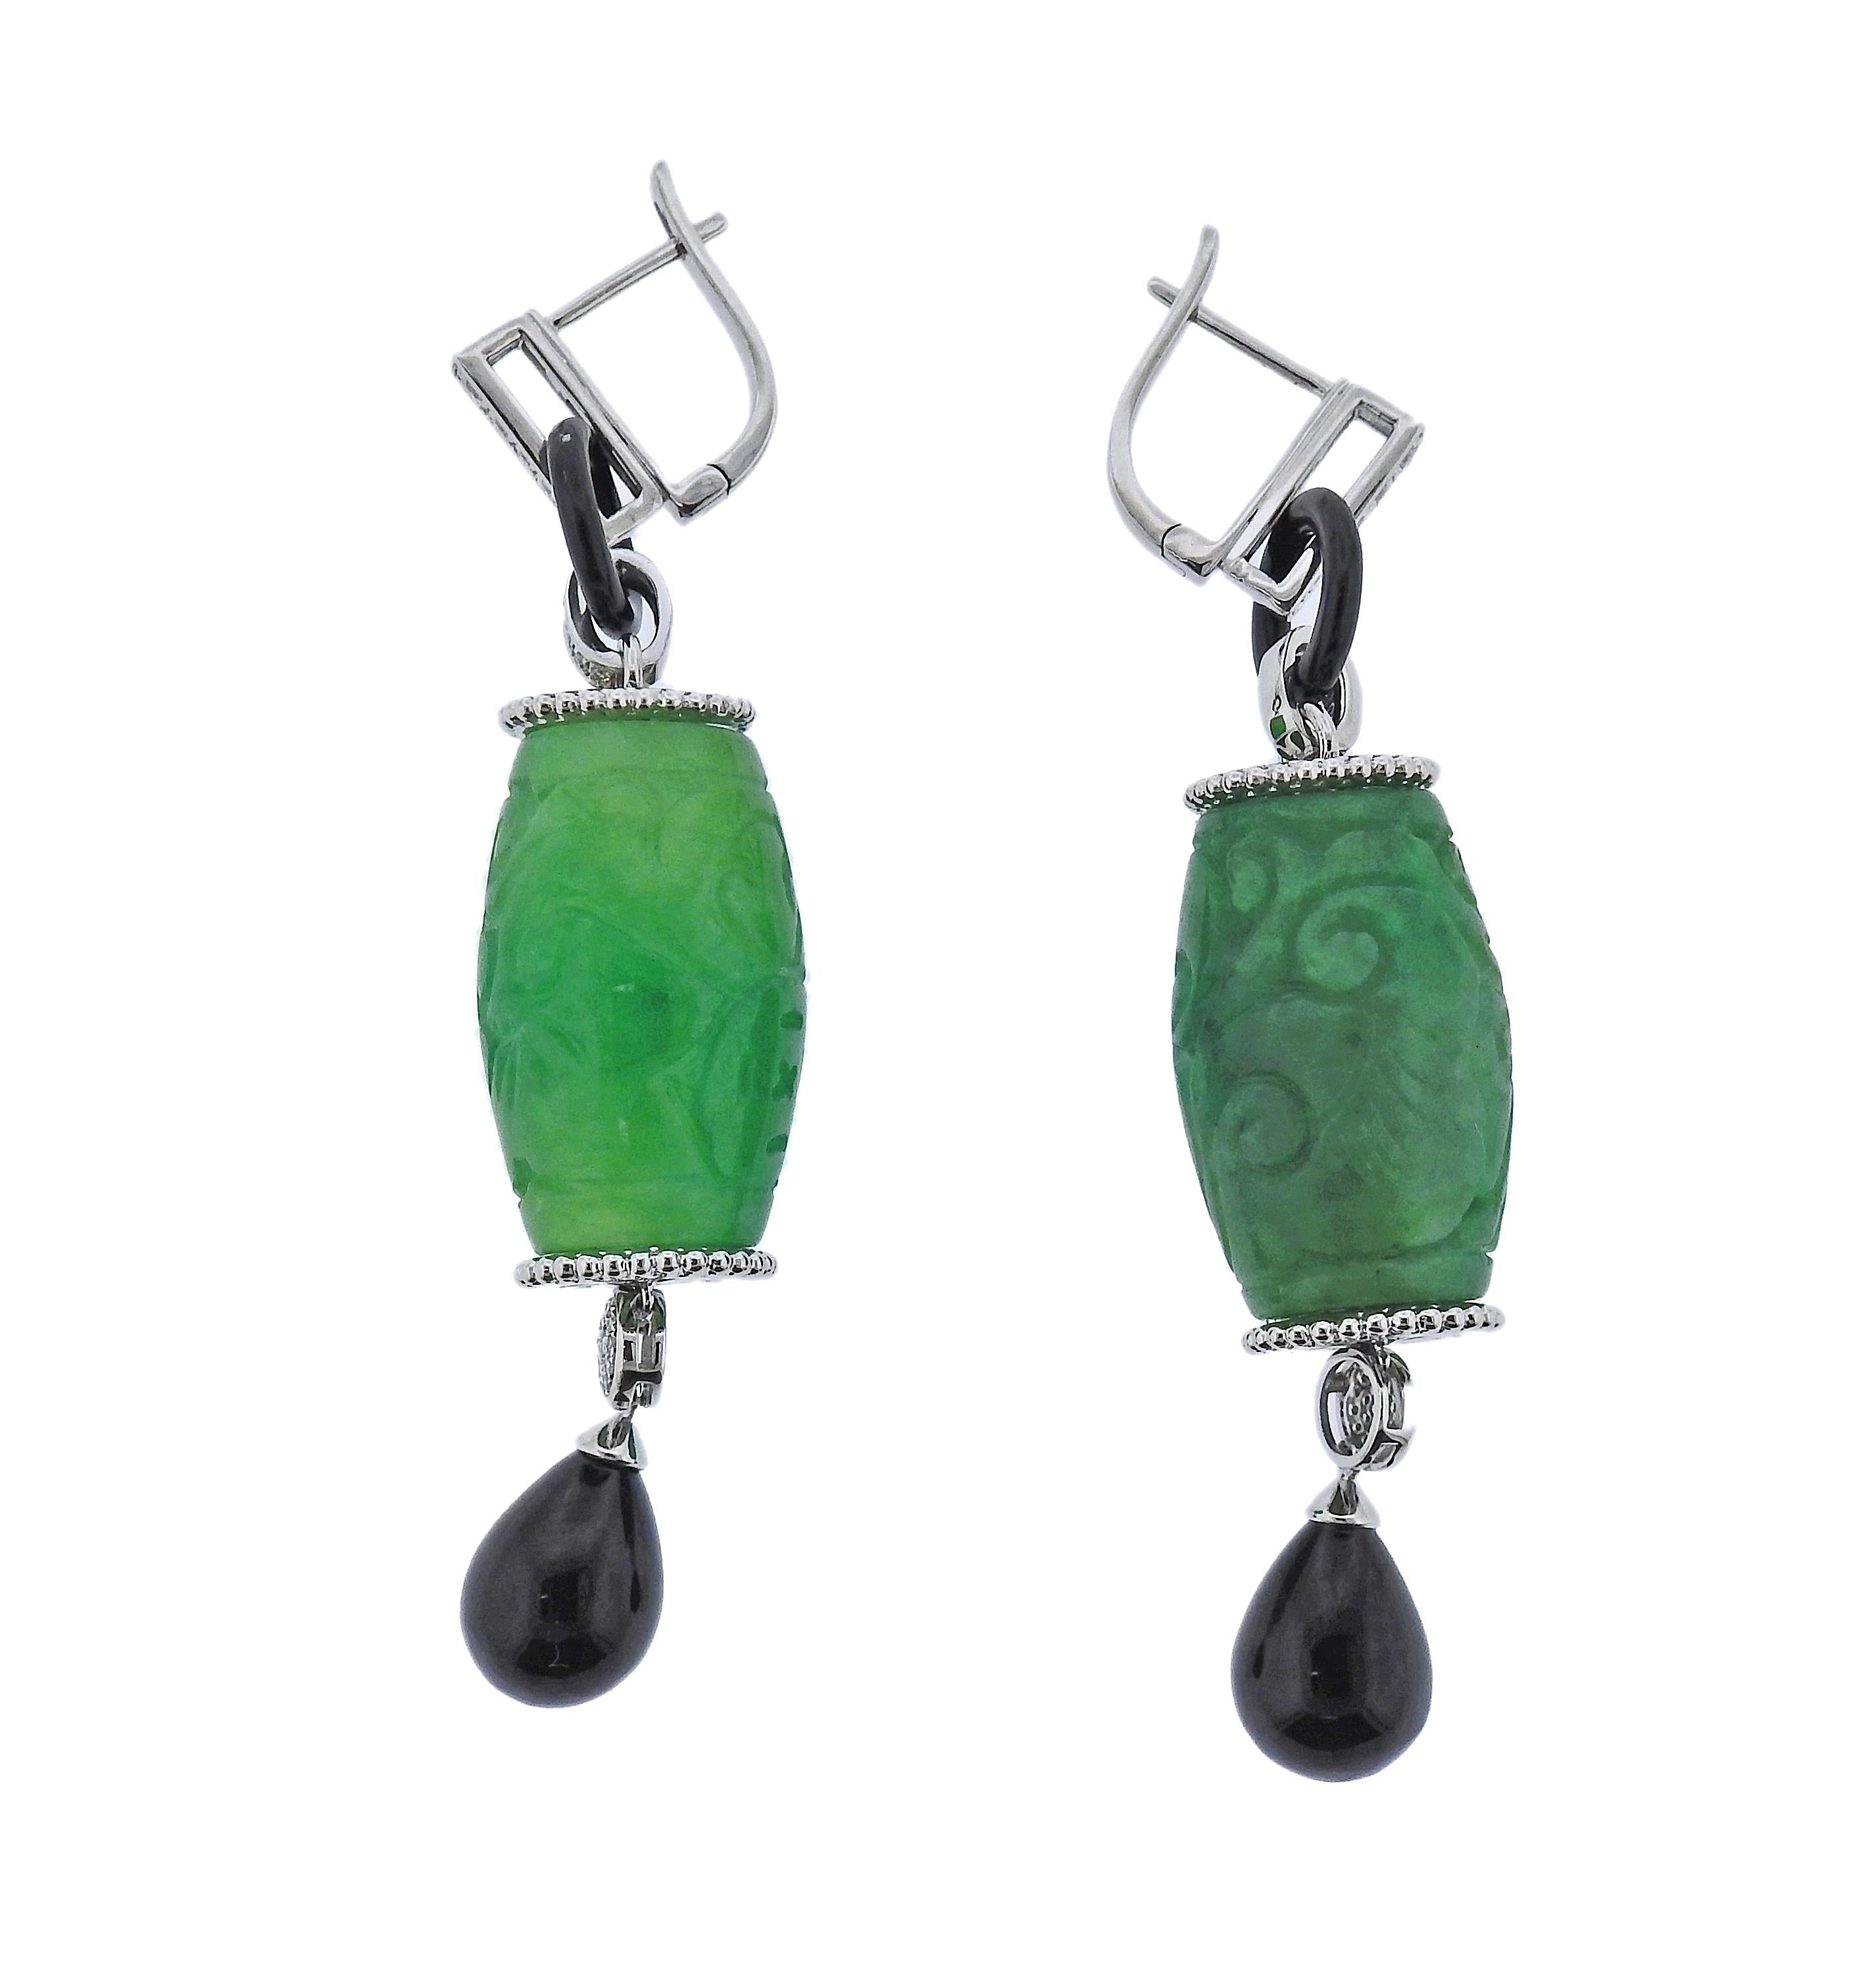 Pair of 14k gold drop earrings, with 79.38ctw carved  jadeite jade, onyx and 0.28ctw in diamonds. Earrings are 65mm long. Marked 585. Weight - 27.4 grams.